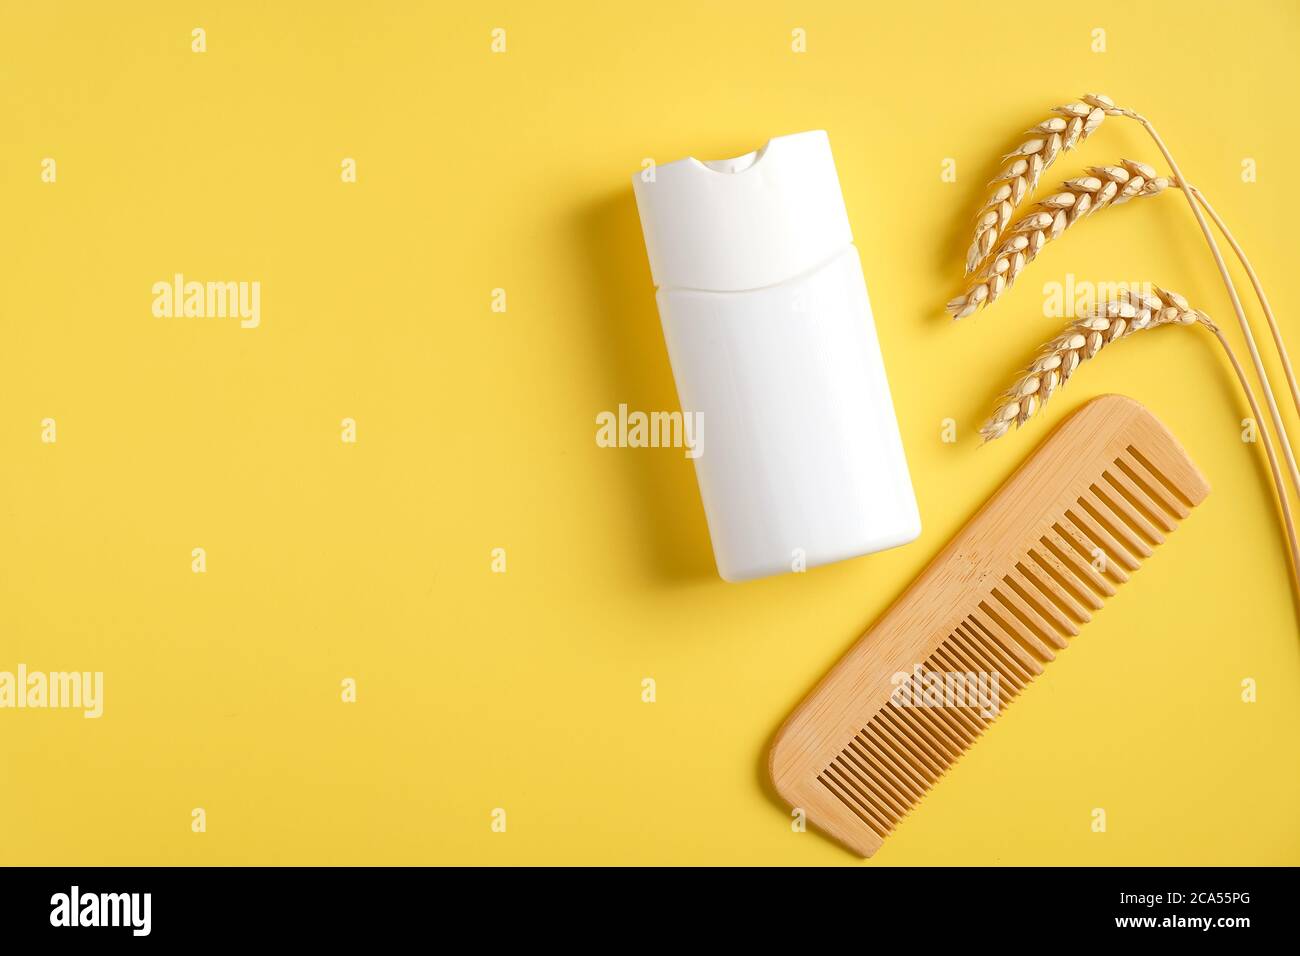 Download Natural Hair Care Product Wooden Hair Comb And Wheat On Yellow Background White Shampoo Bottle Mockup Hair Lotion Packaging Design Flat Lay Top V Stock Photo Alamy